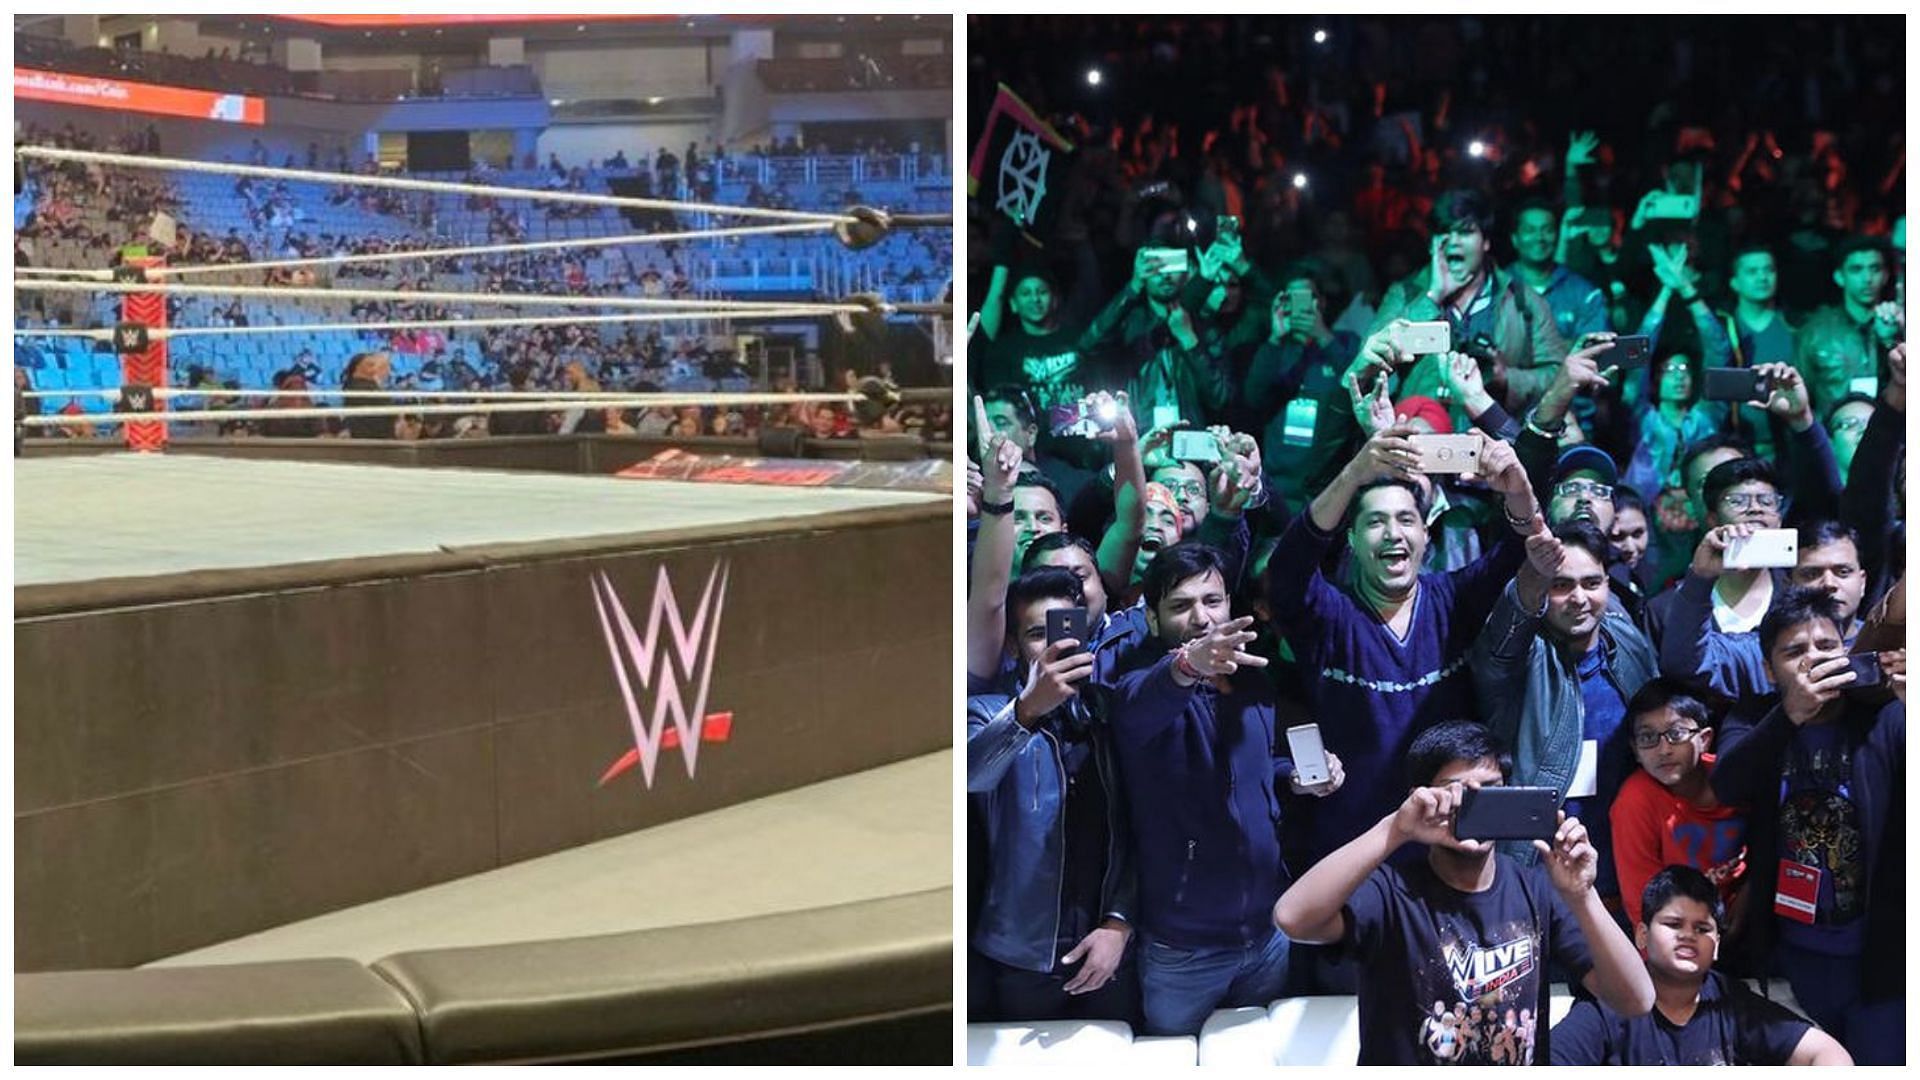 A huge WWE star returned to in-ring action.